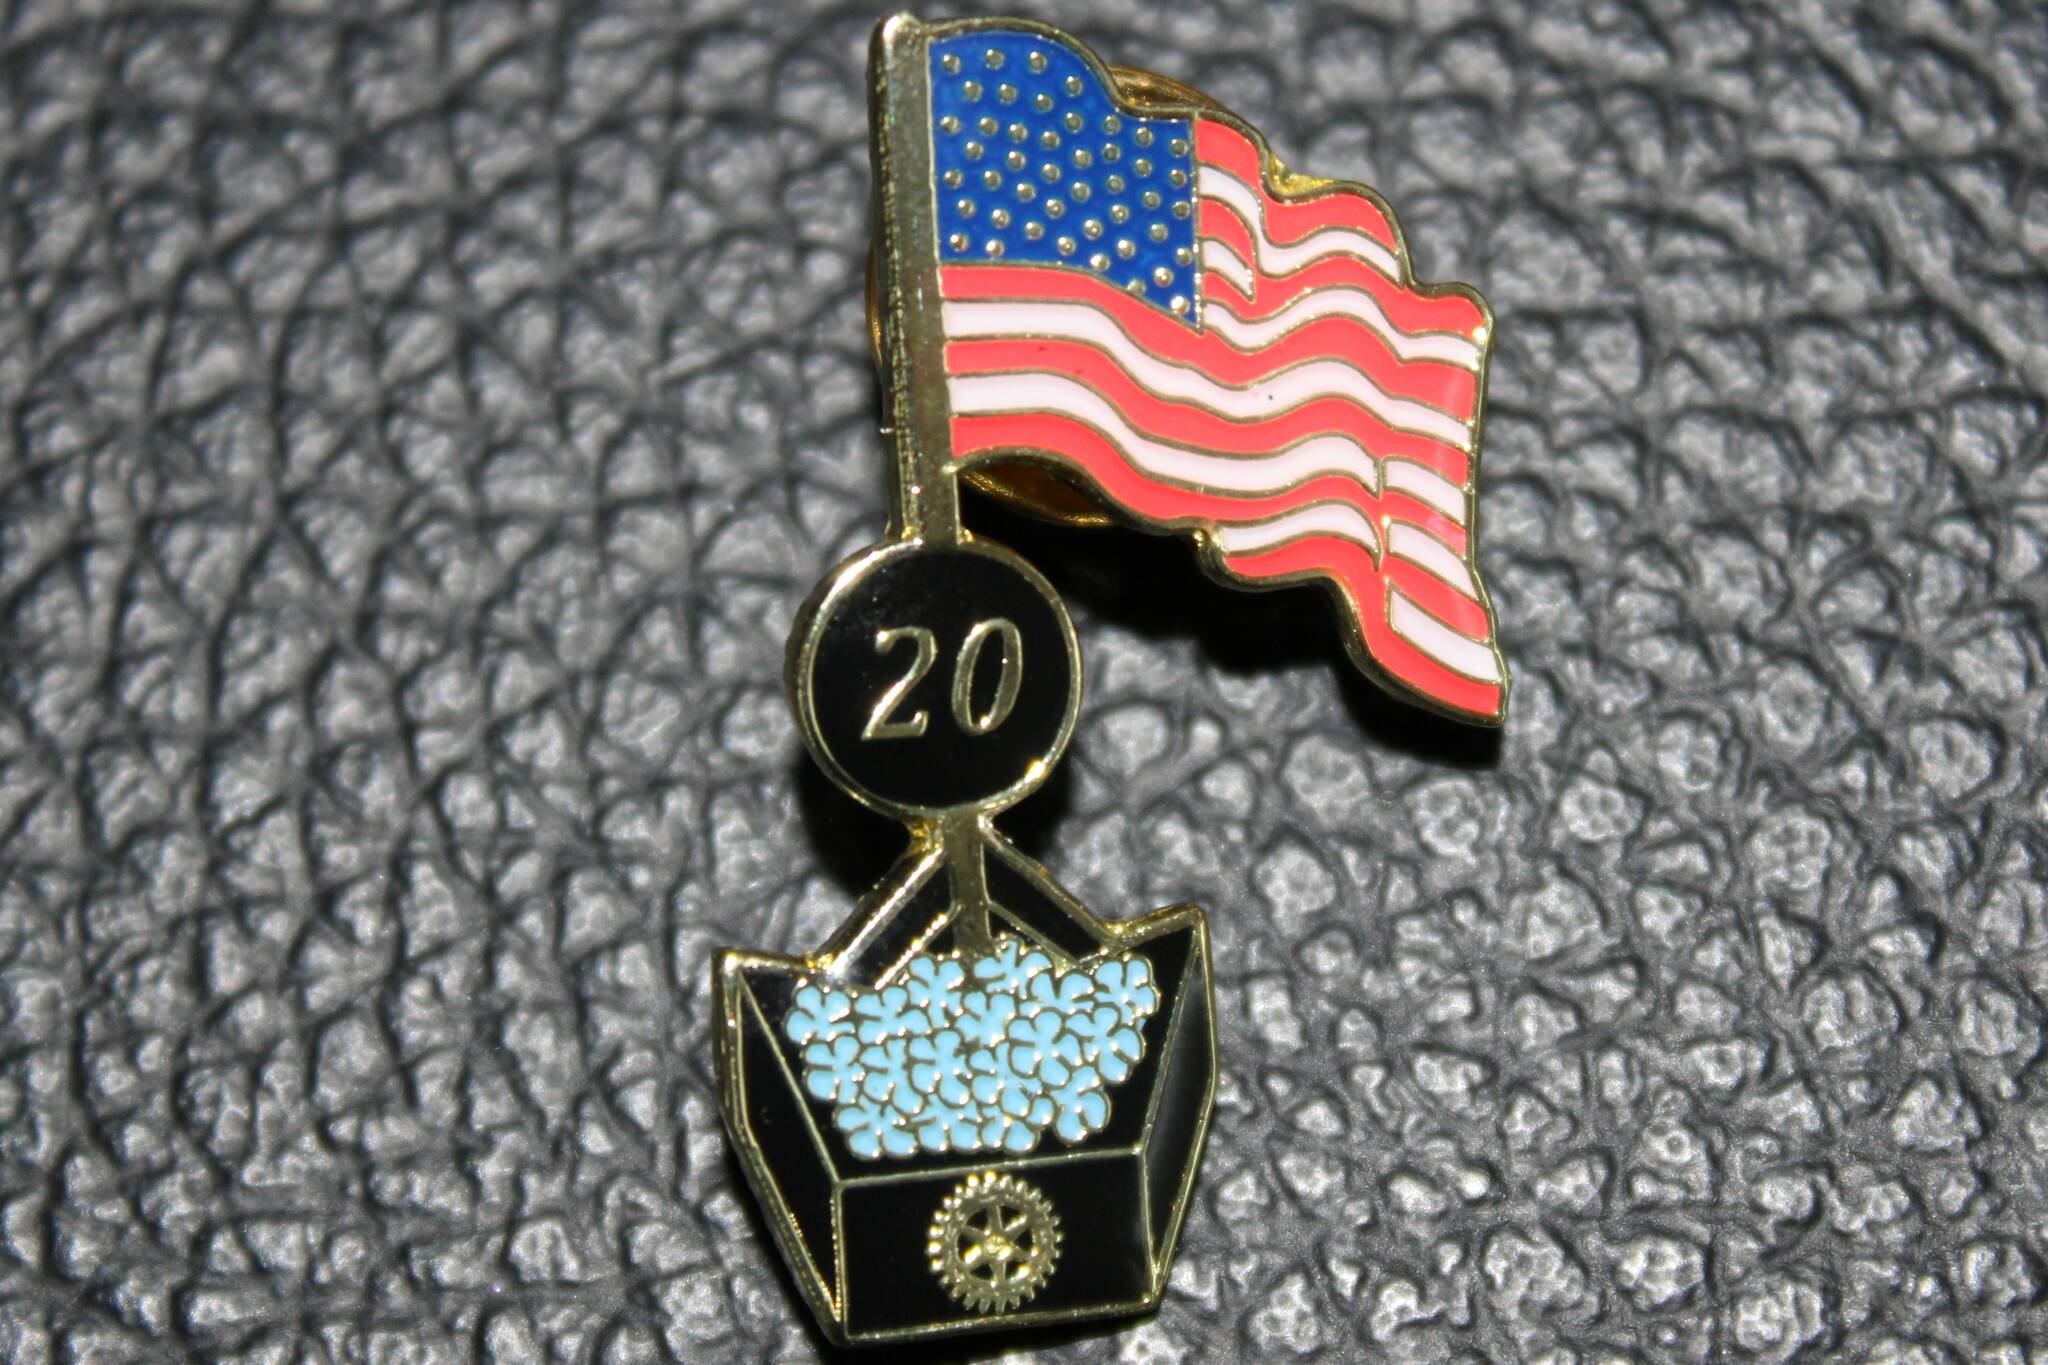 Volunteers passed out lapel pins to commemorate the occasion. (Dana Zigmund/Juneau Empire)